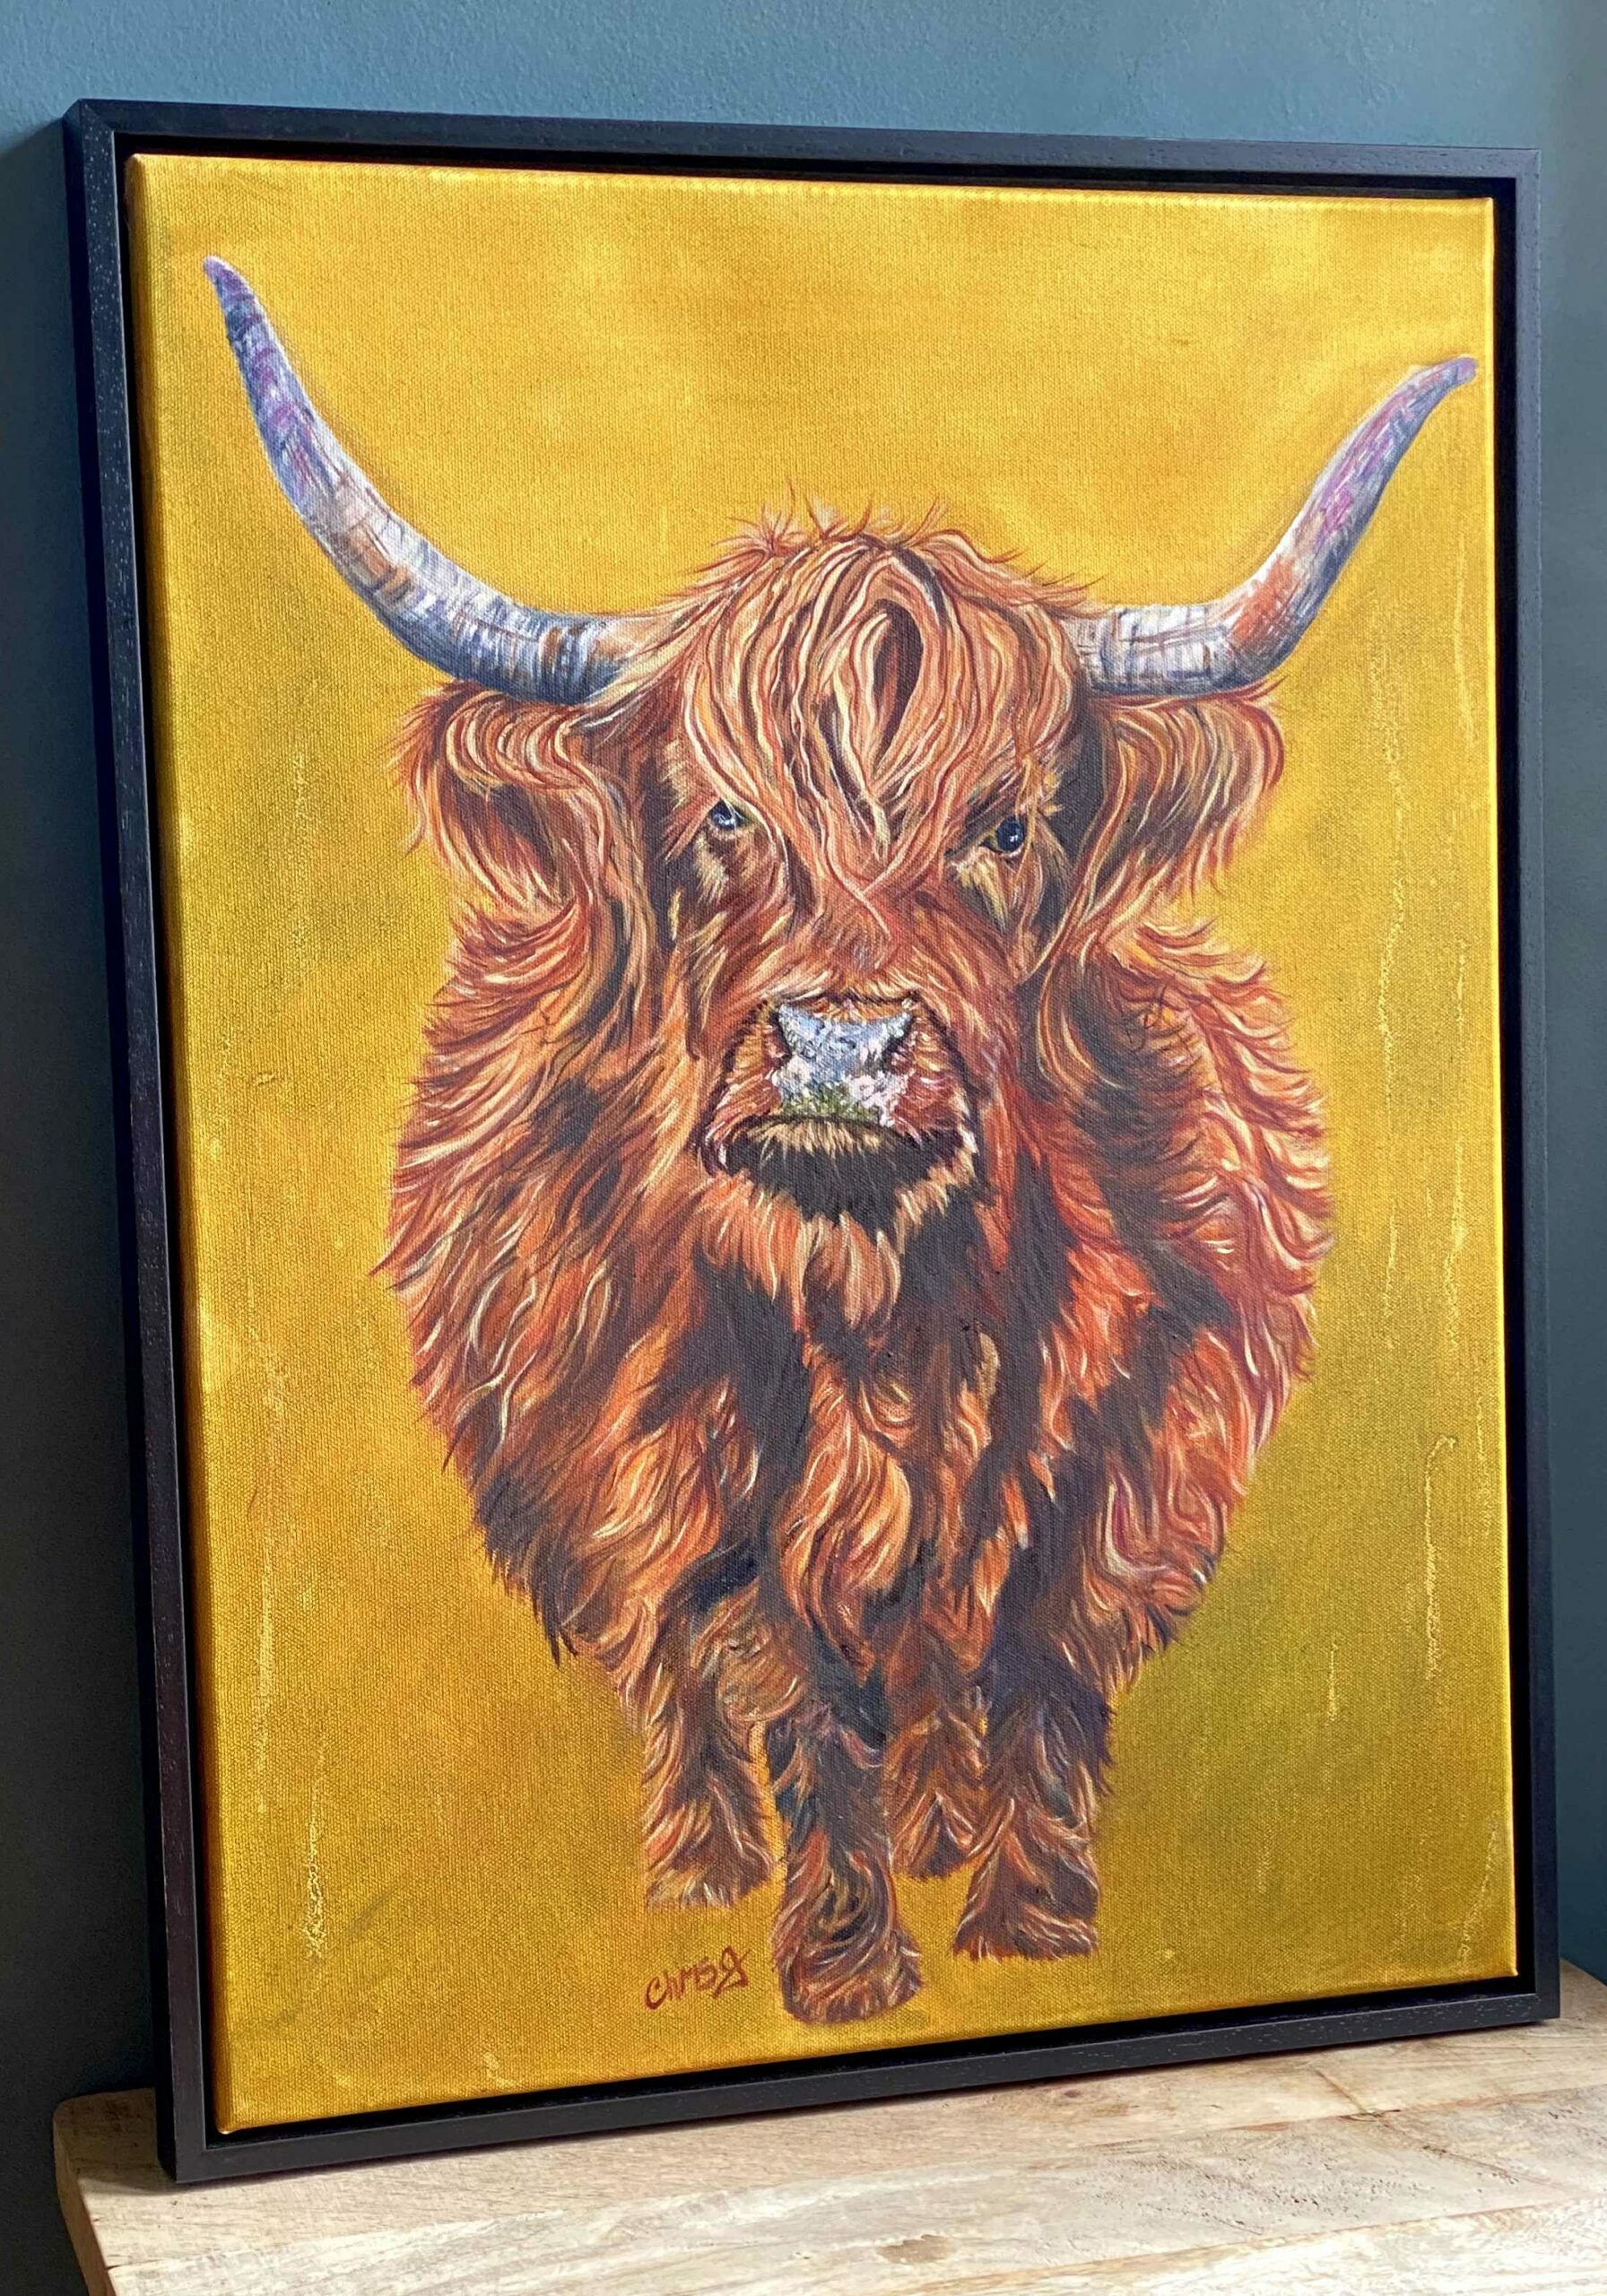 Harriet is a big highland cow full cow in oils rust to brown the background in a bold bright mustard colour